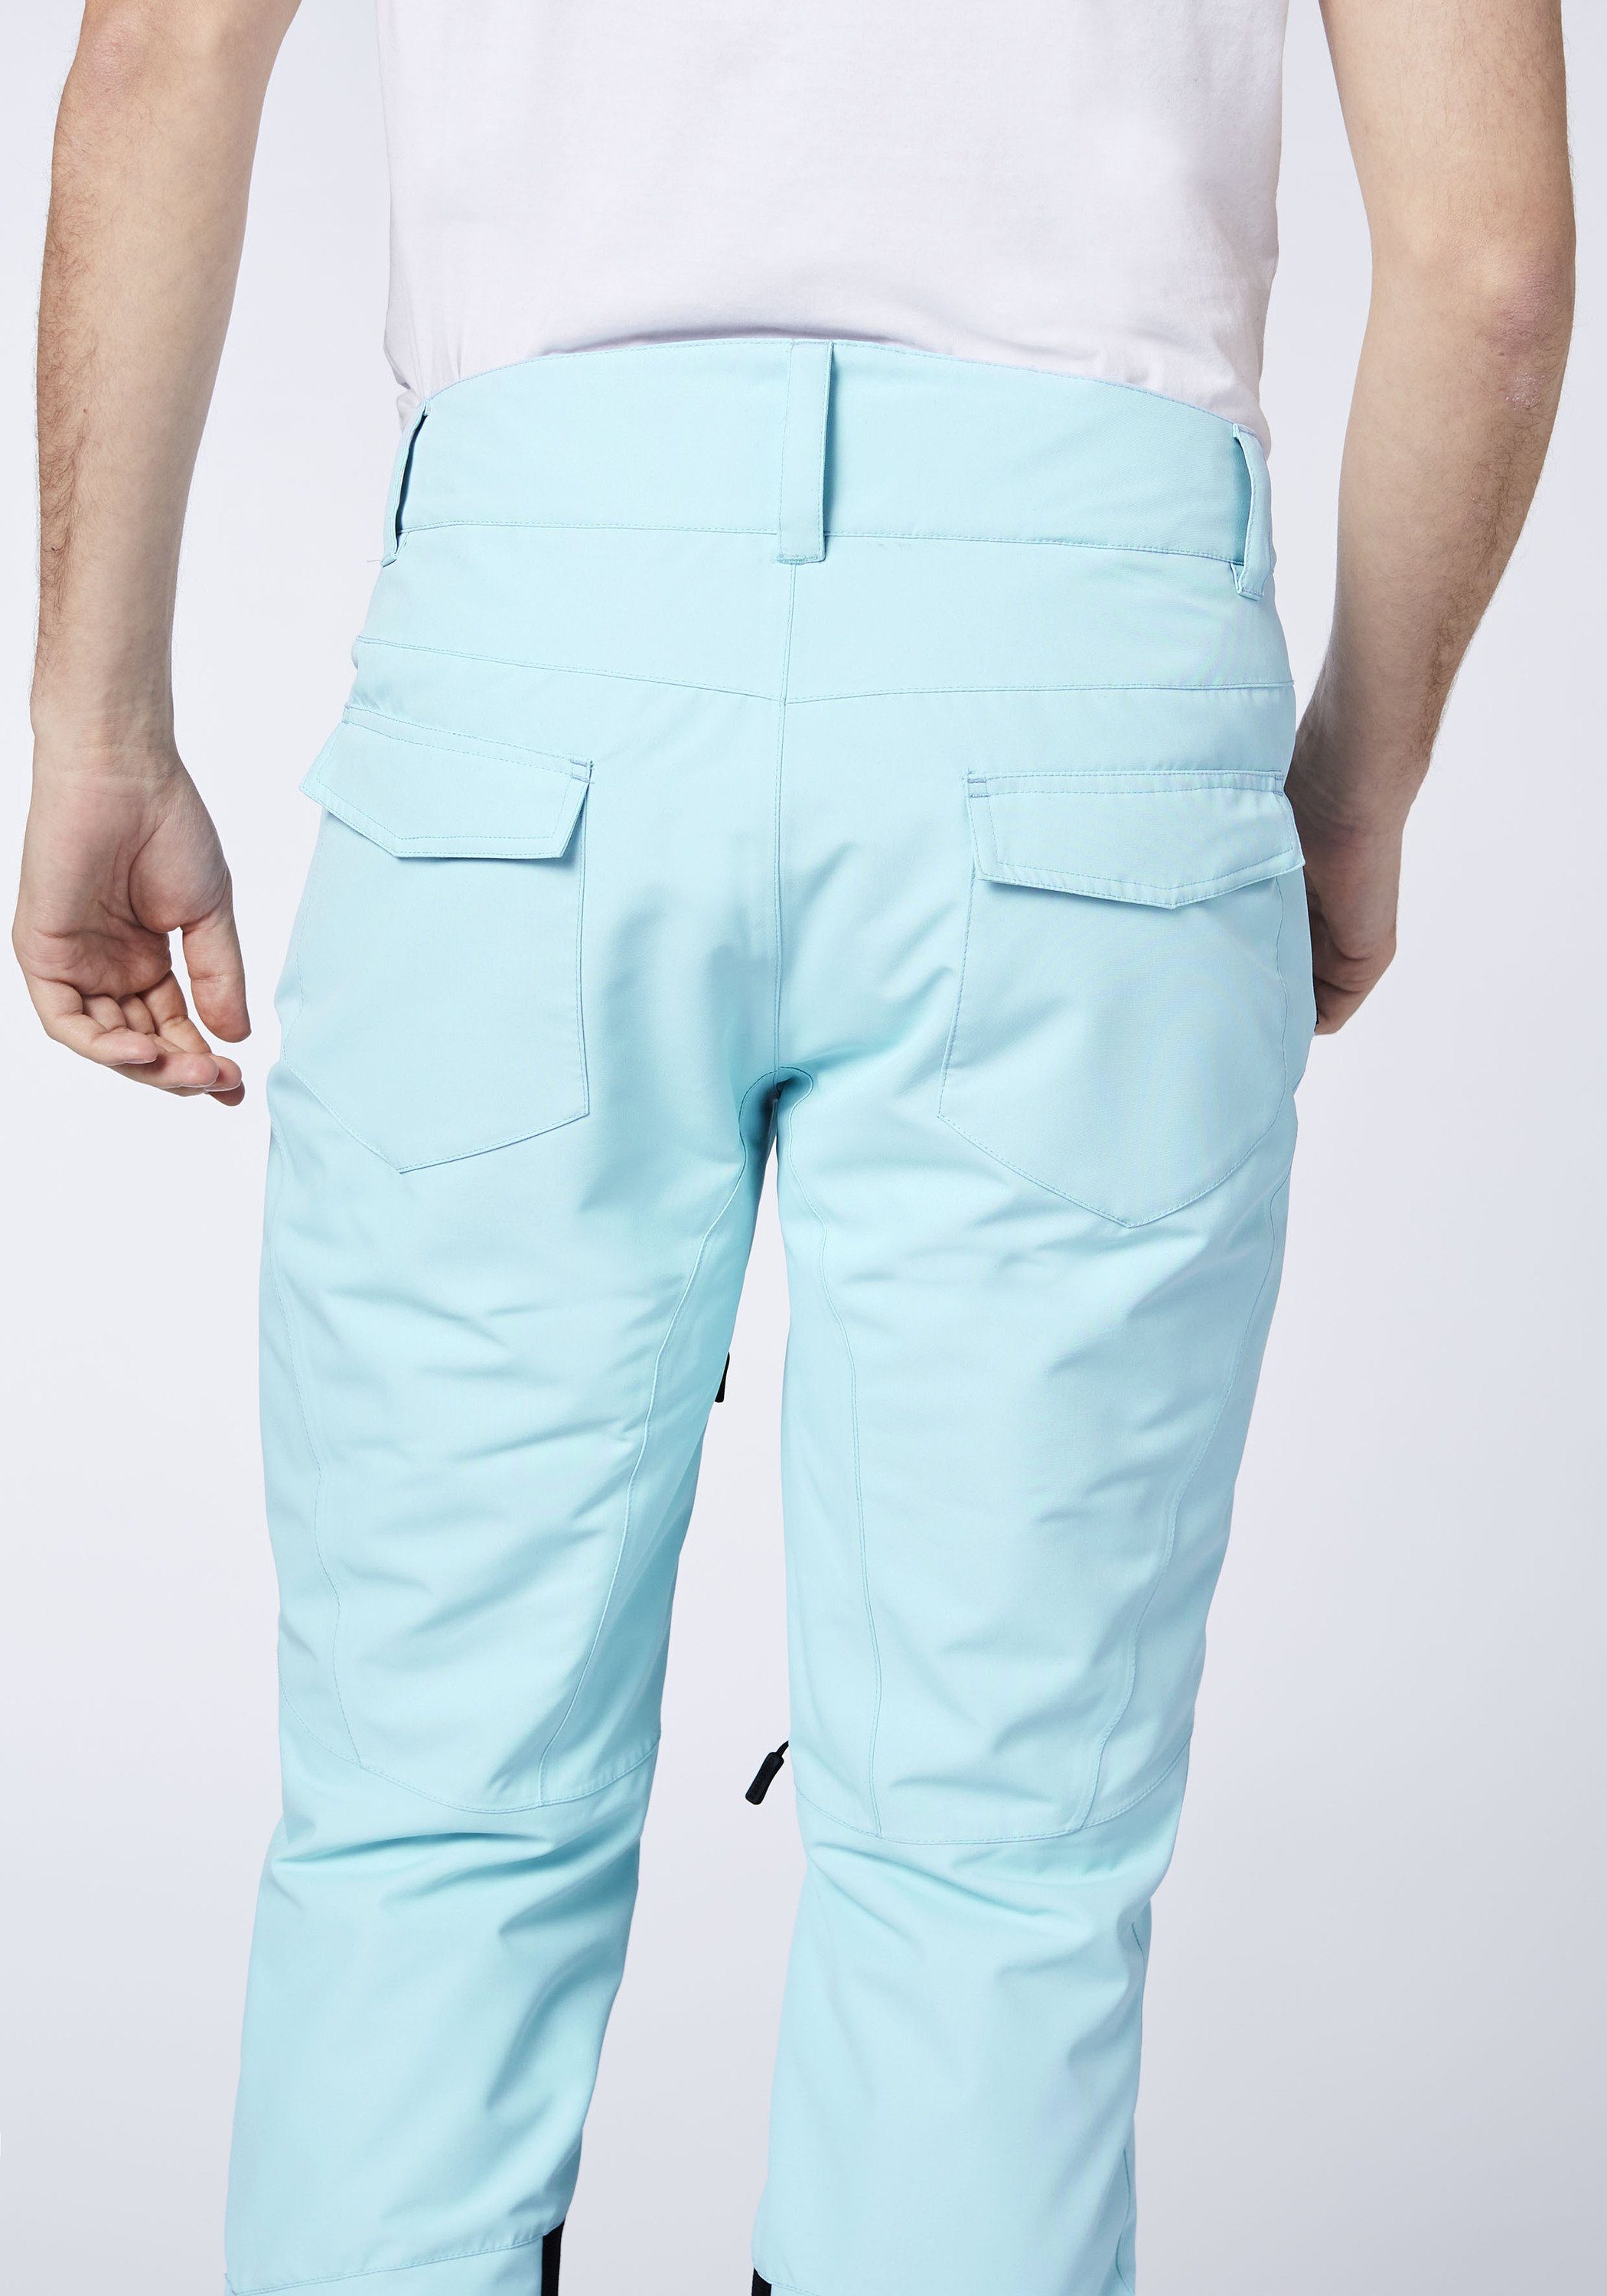 Schneefang Sporthose Blue mit Cool Skihose Chiemsee 1